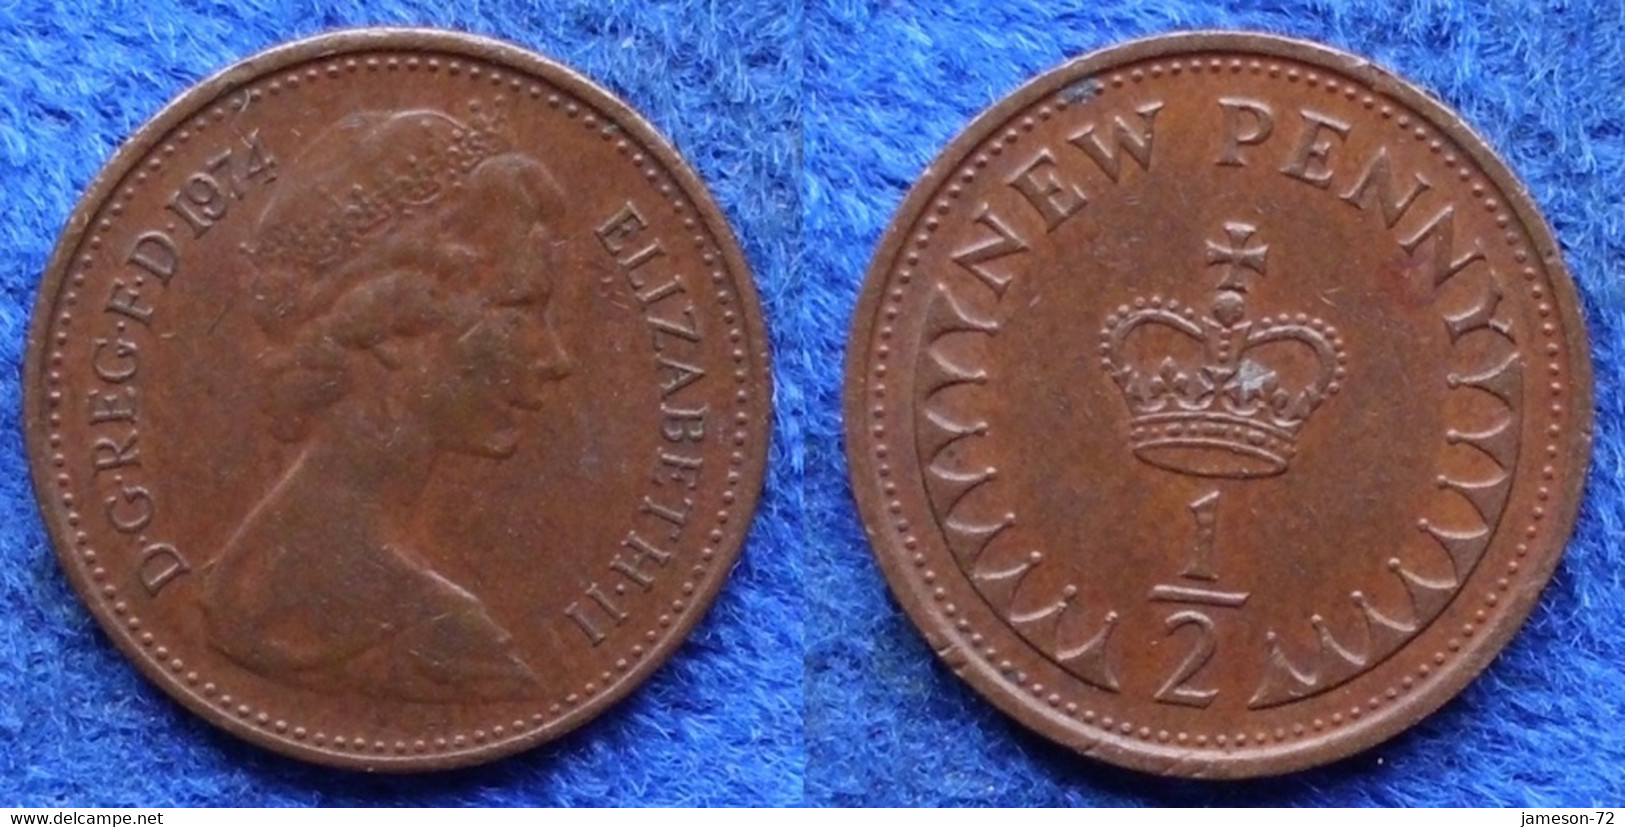 UK - 1/2 New Penny 1974 KM# 914 Elizabeth II Decimal Coinage - Edelweiss Coins - 1/2 Penny & 1/2 New Penny